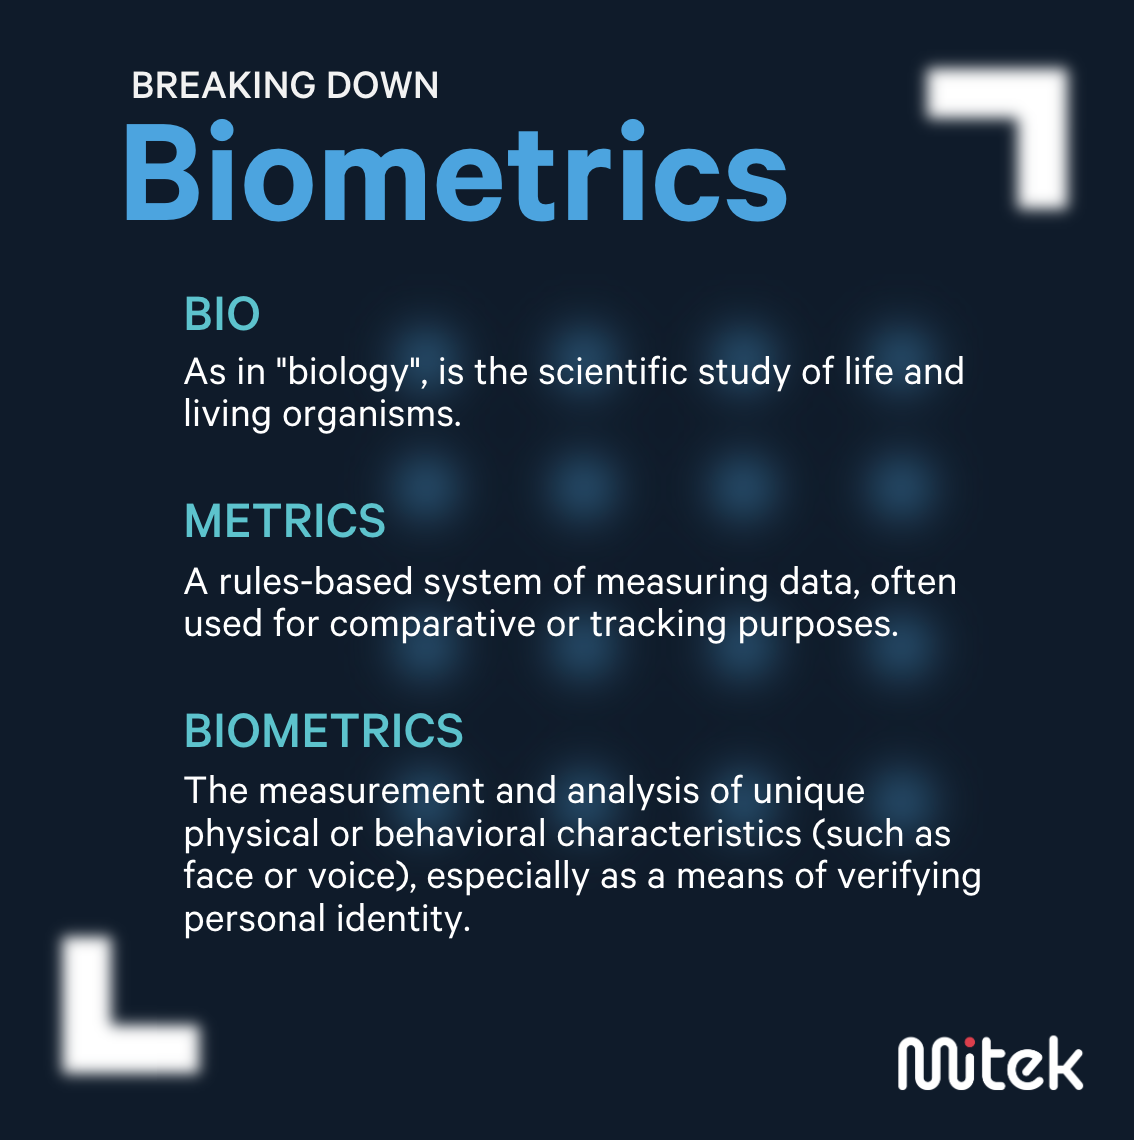 Example images of some biometric characteristics commonly used in